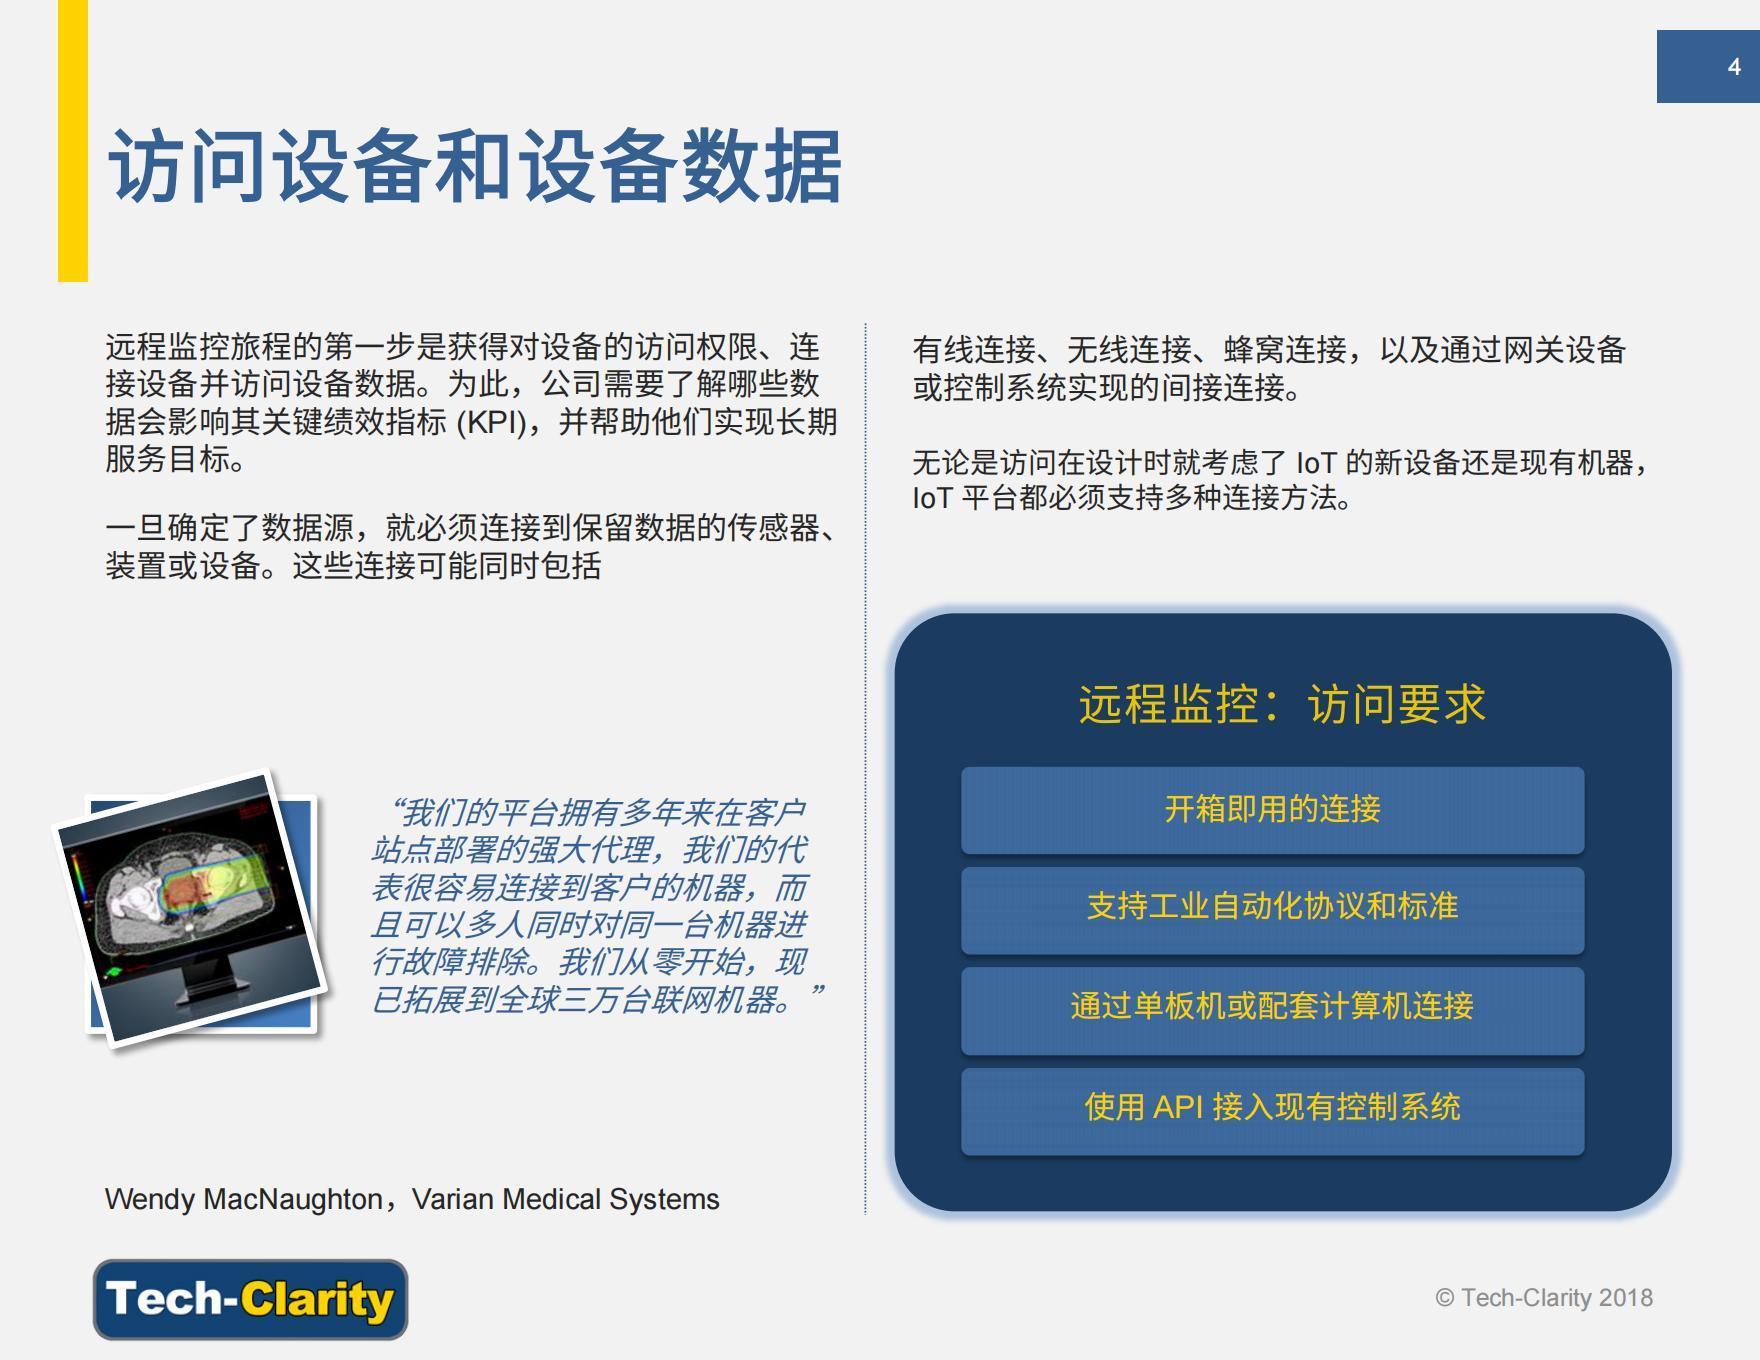 Buyer's Guide - Improving Service with Remote Monitoring (Simplified Chinese)_03